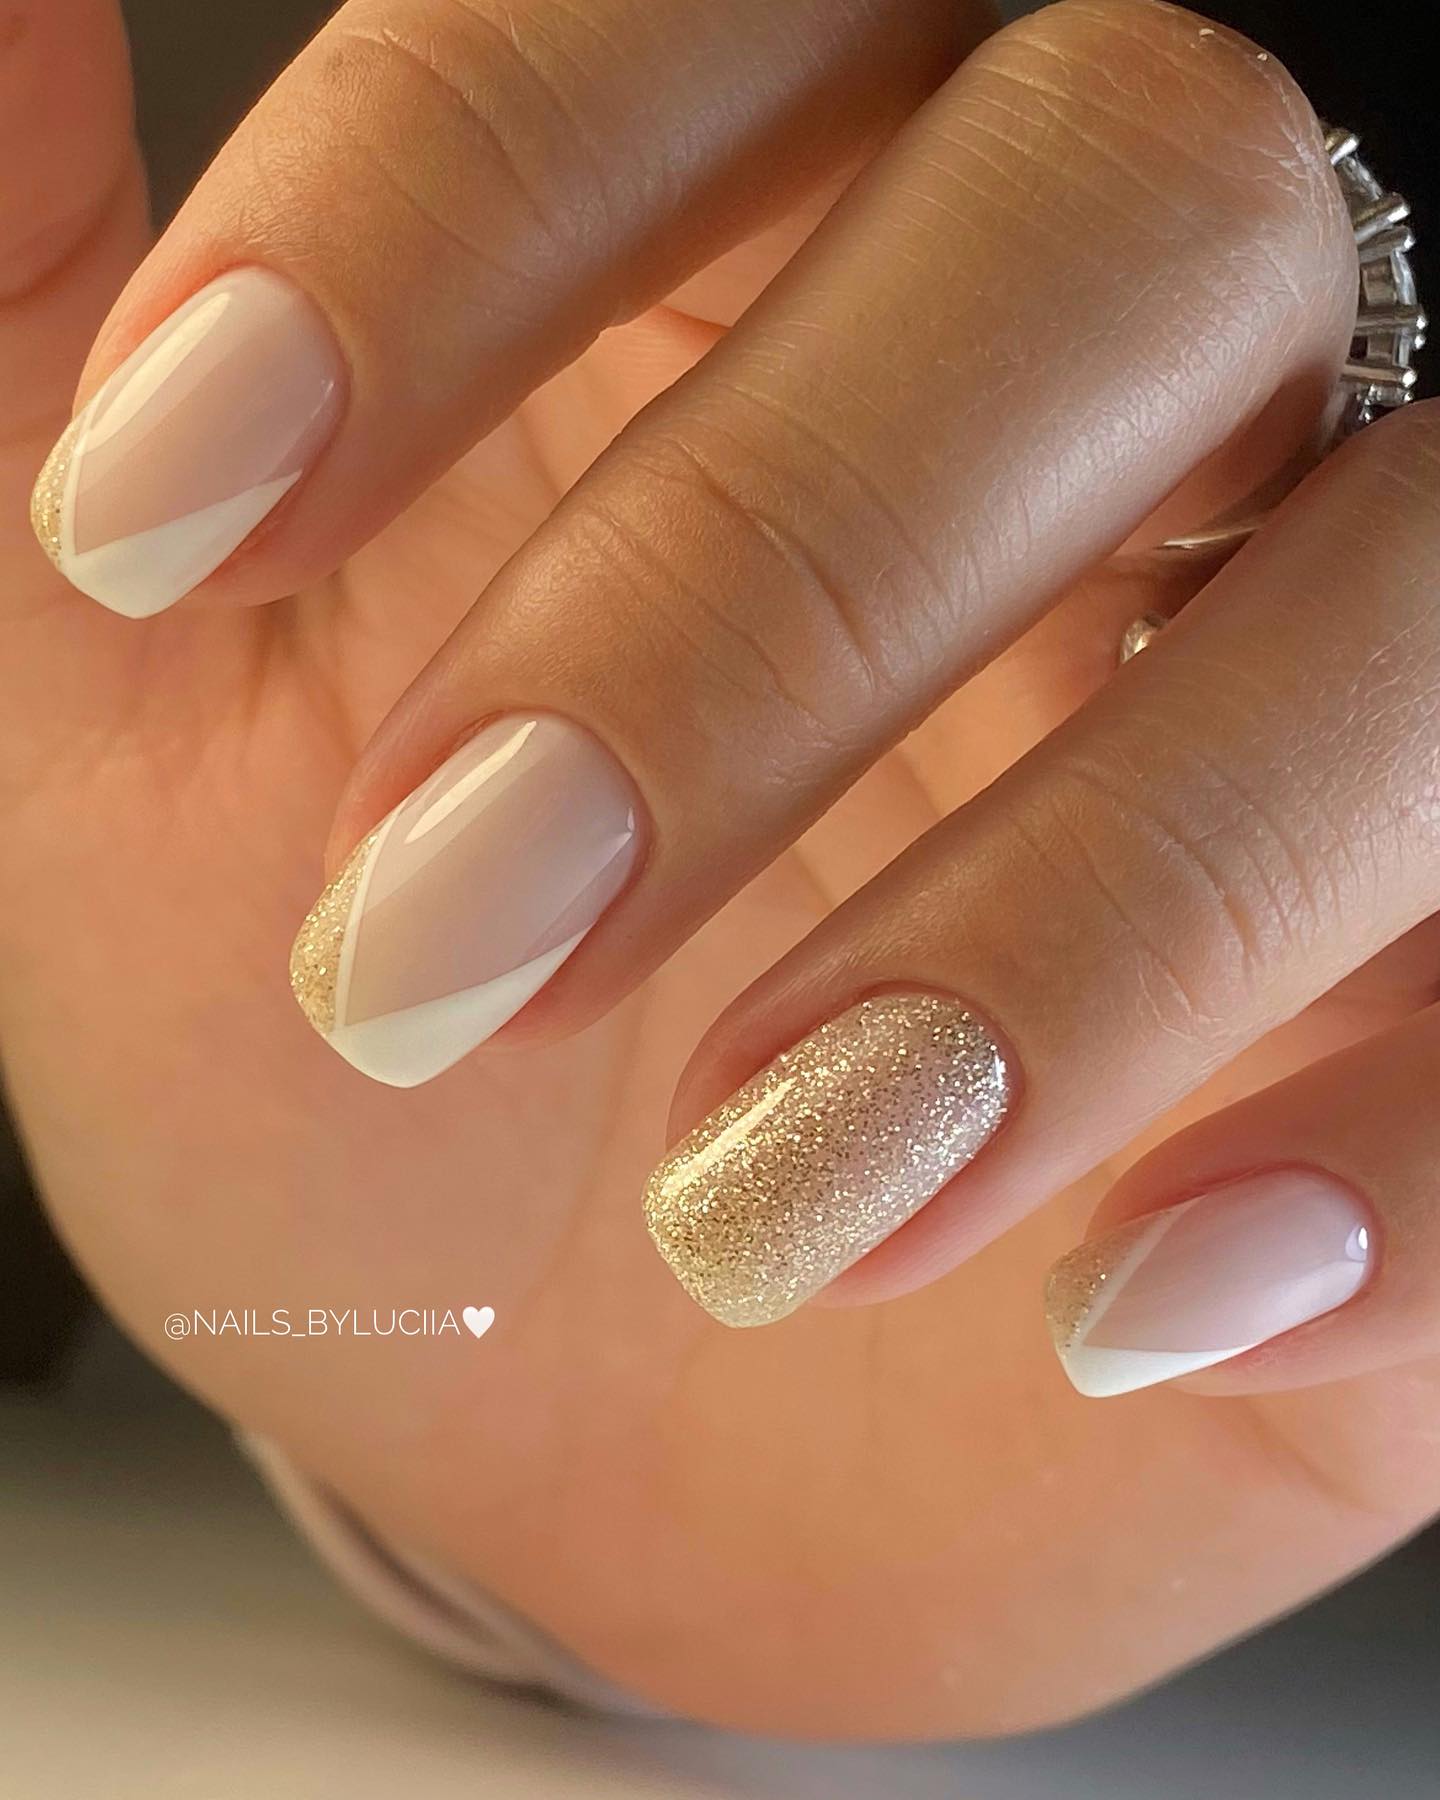 100+ Short Nail Designs You’ll Want To Try This Year images 76